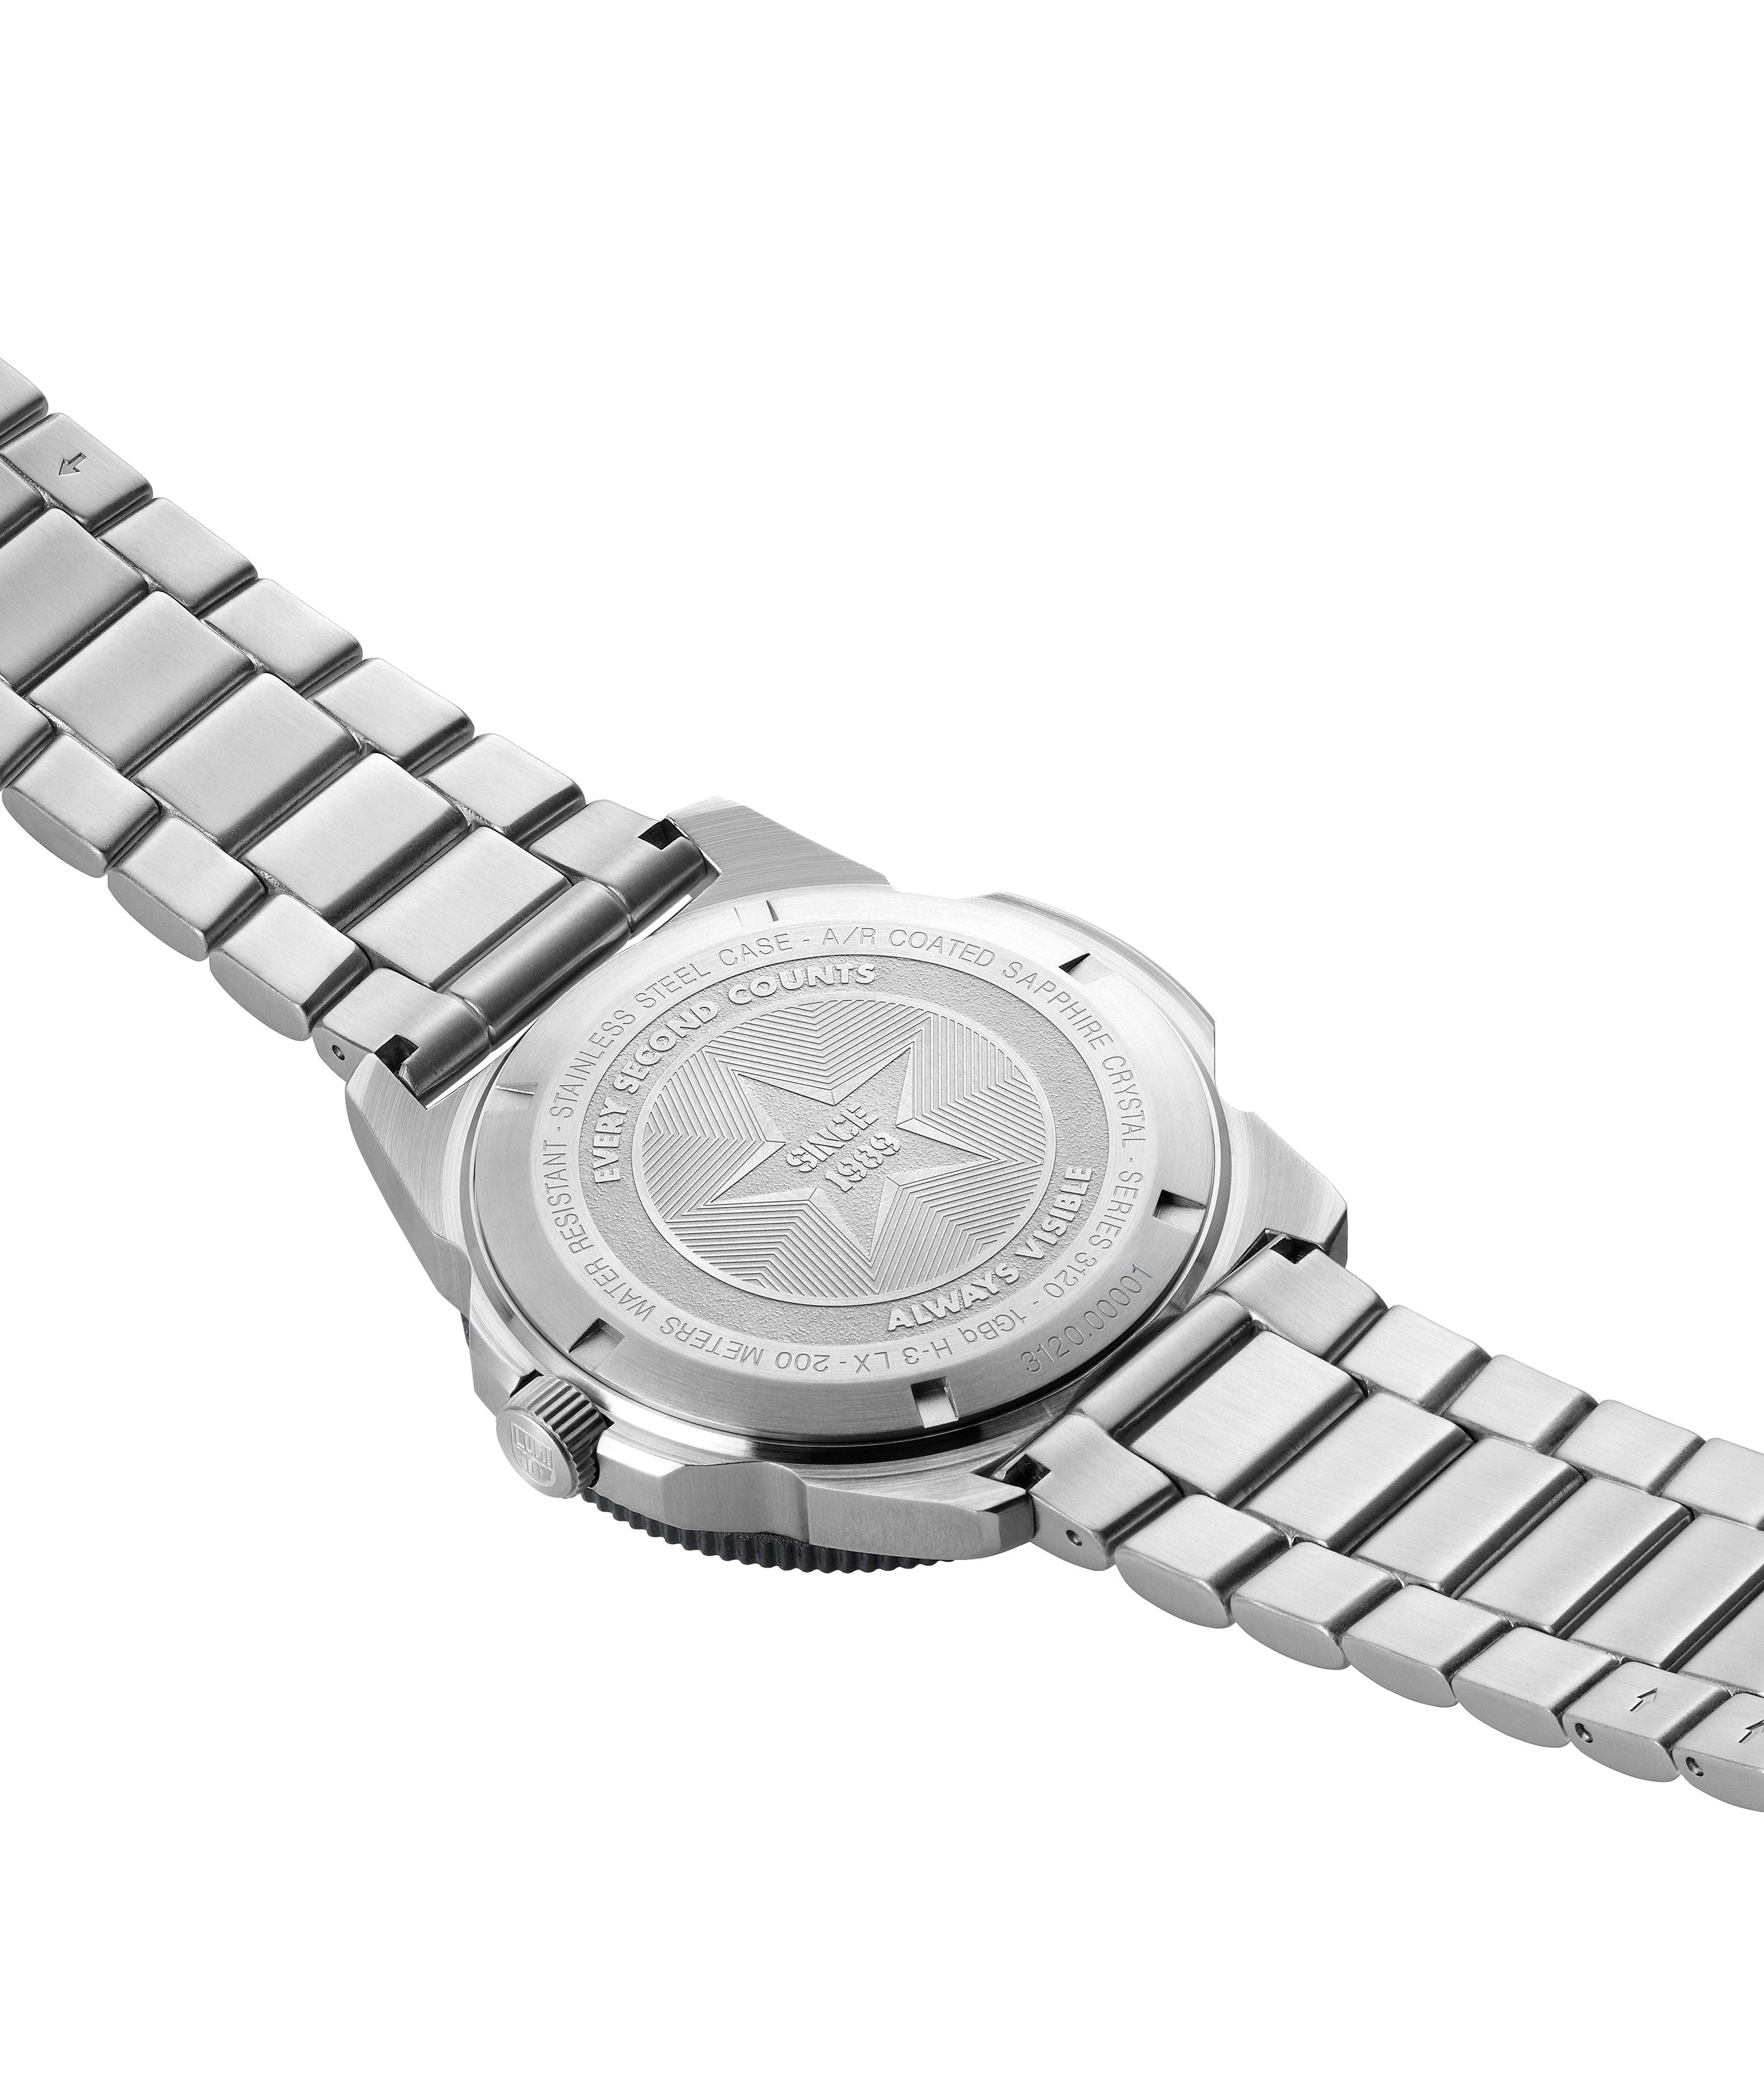 Pacific Diver 3122 Watch image 1